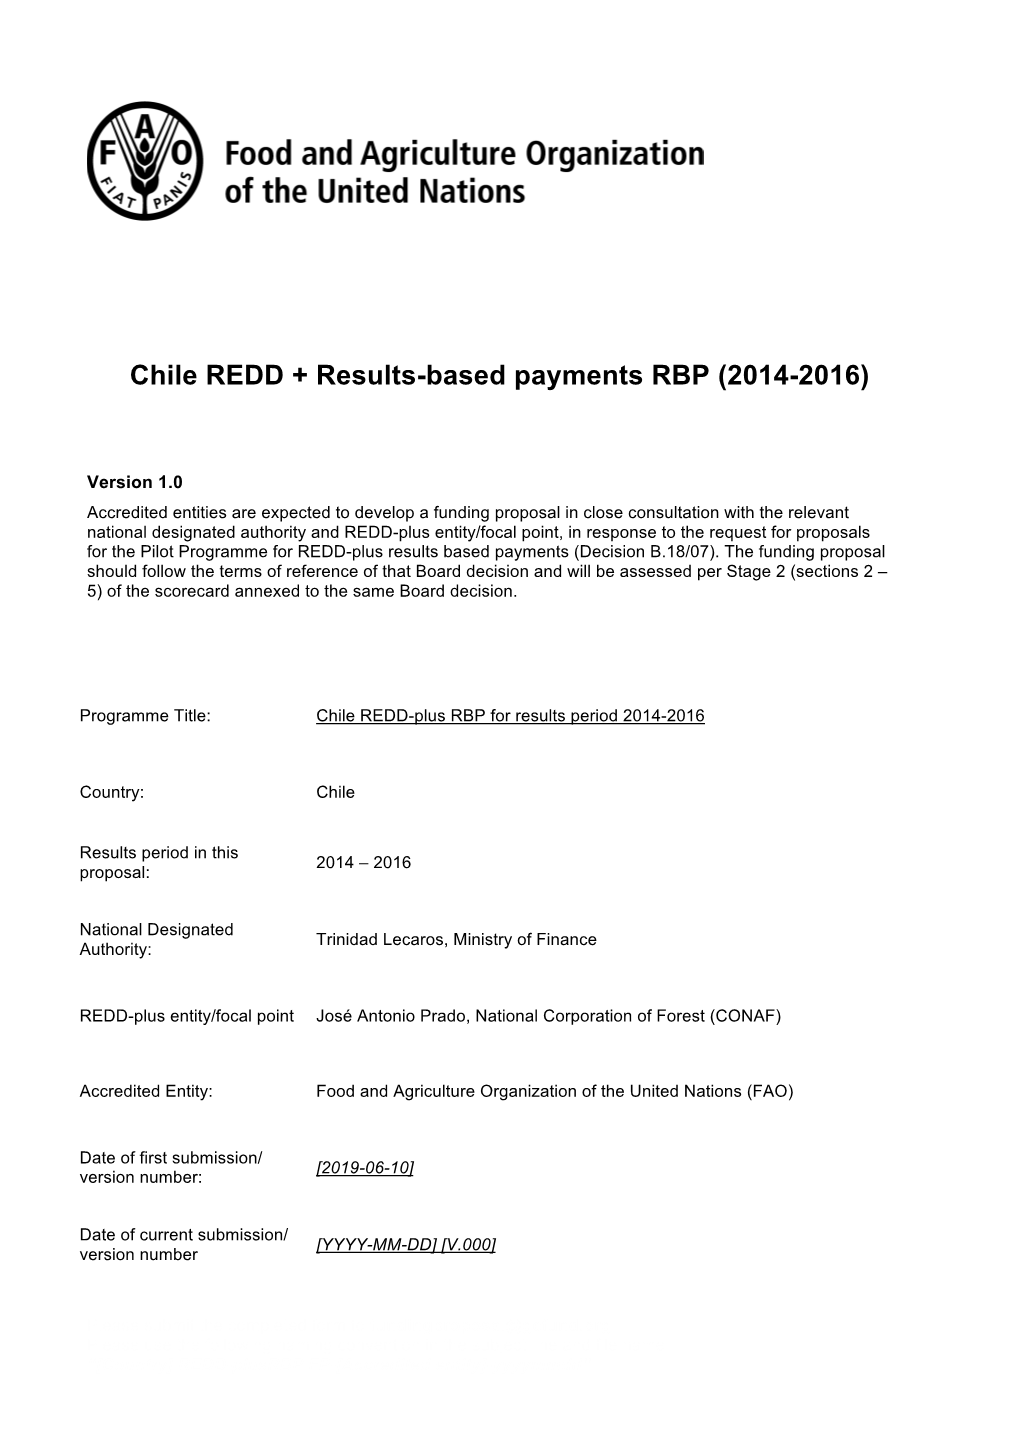 Chile REDD + Results-Based Payments RBP (2014-2016)